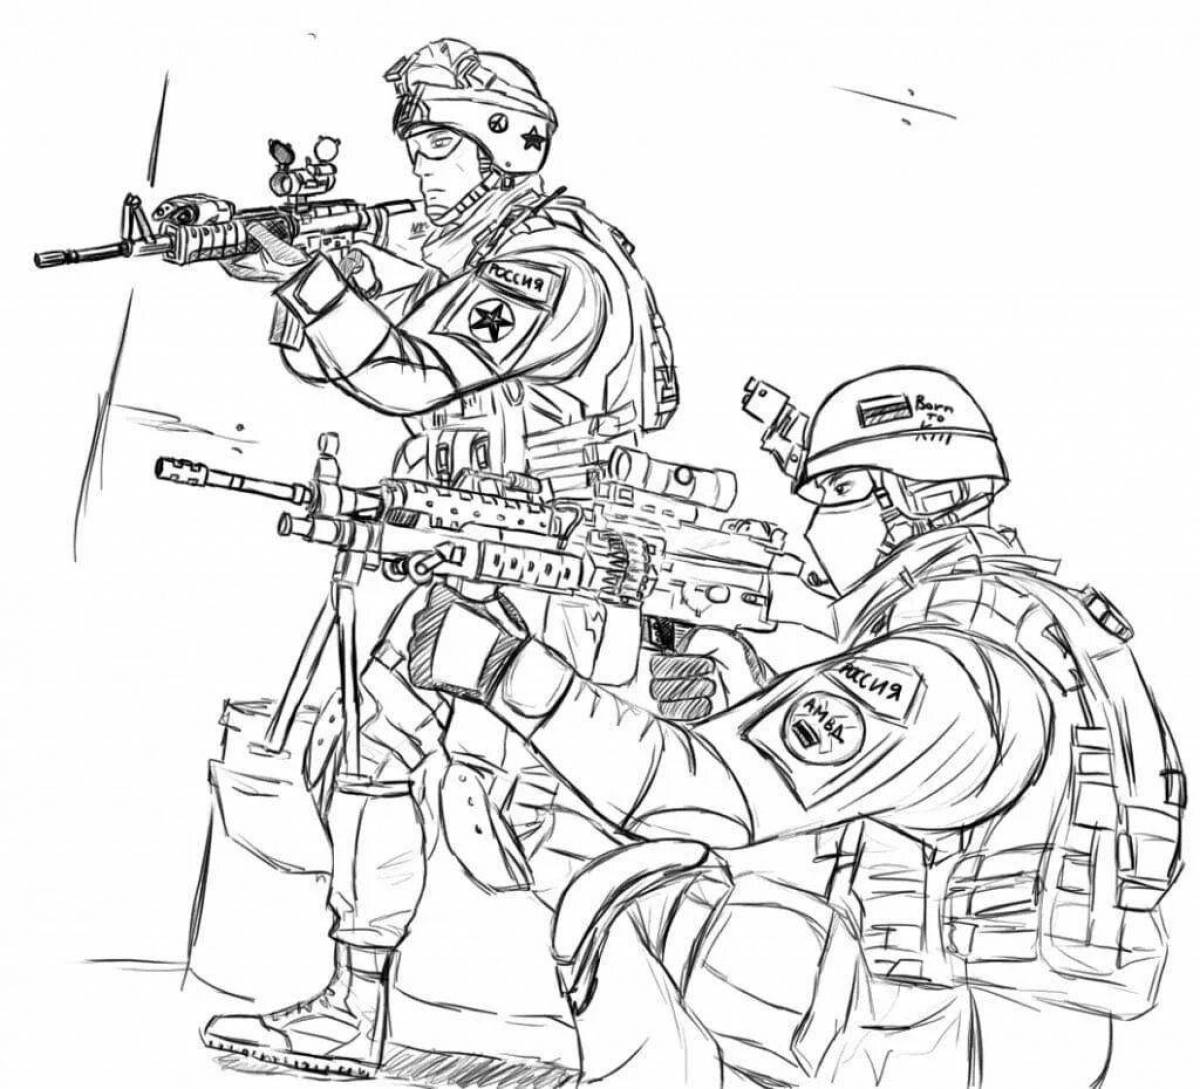 A strikingly colorful Russian soldier coloring page